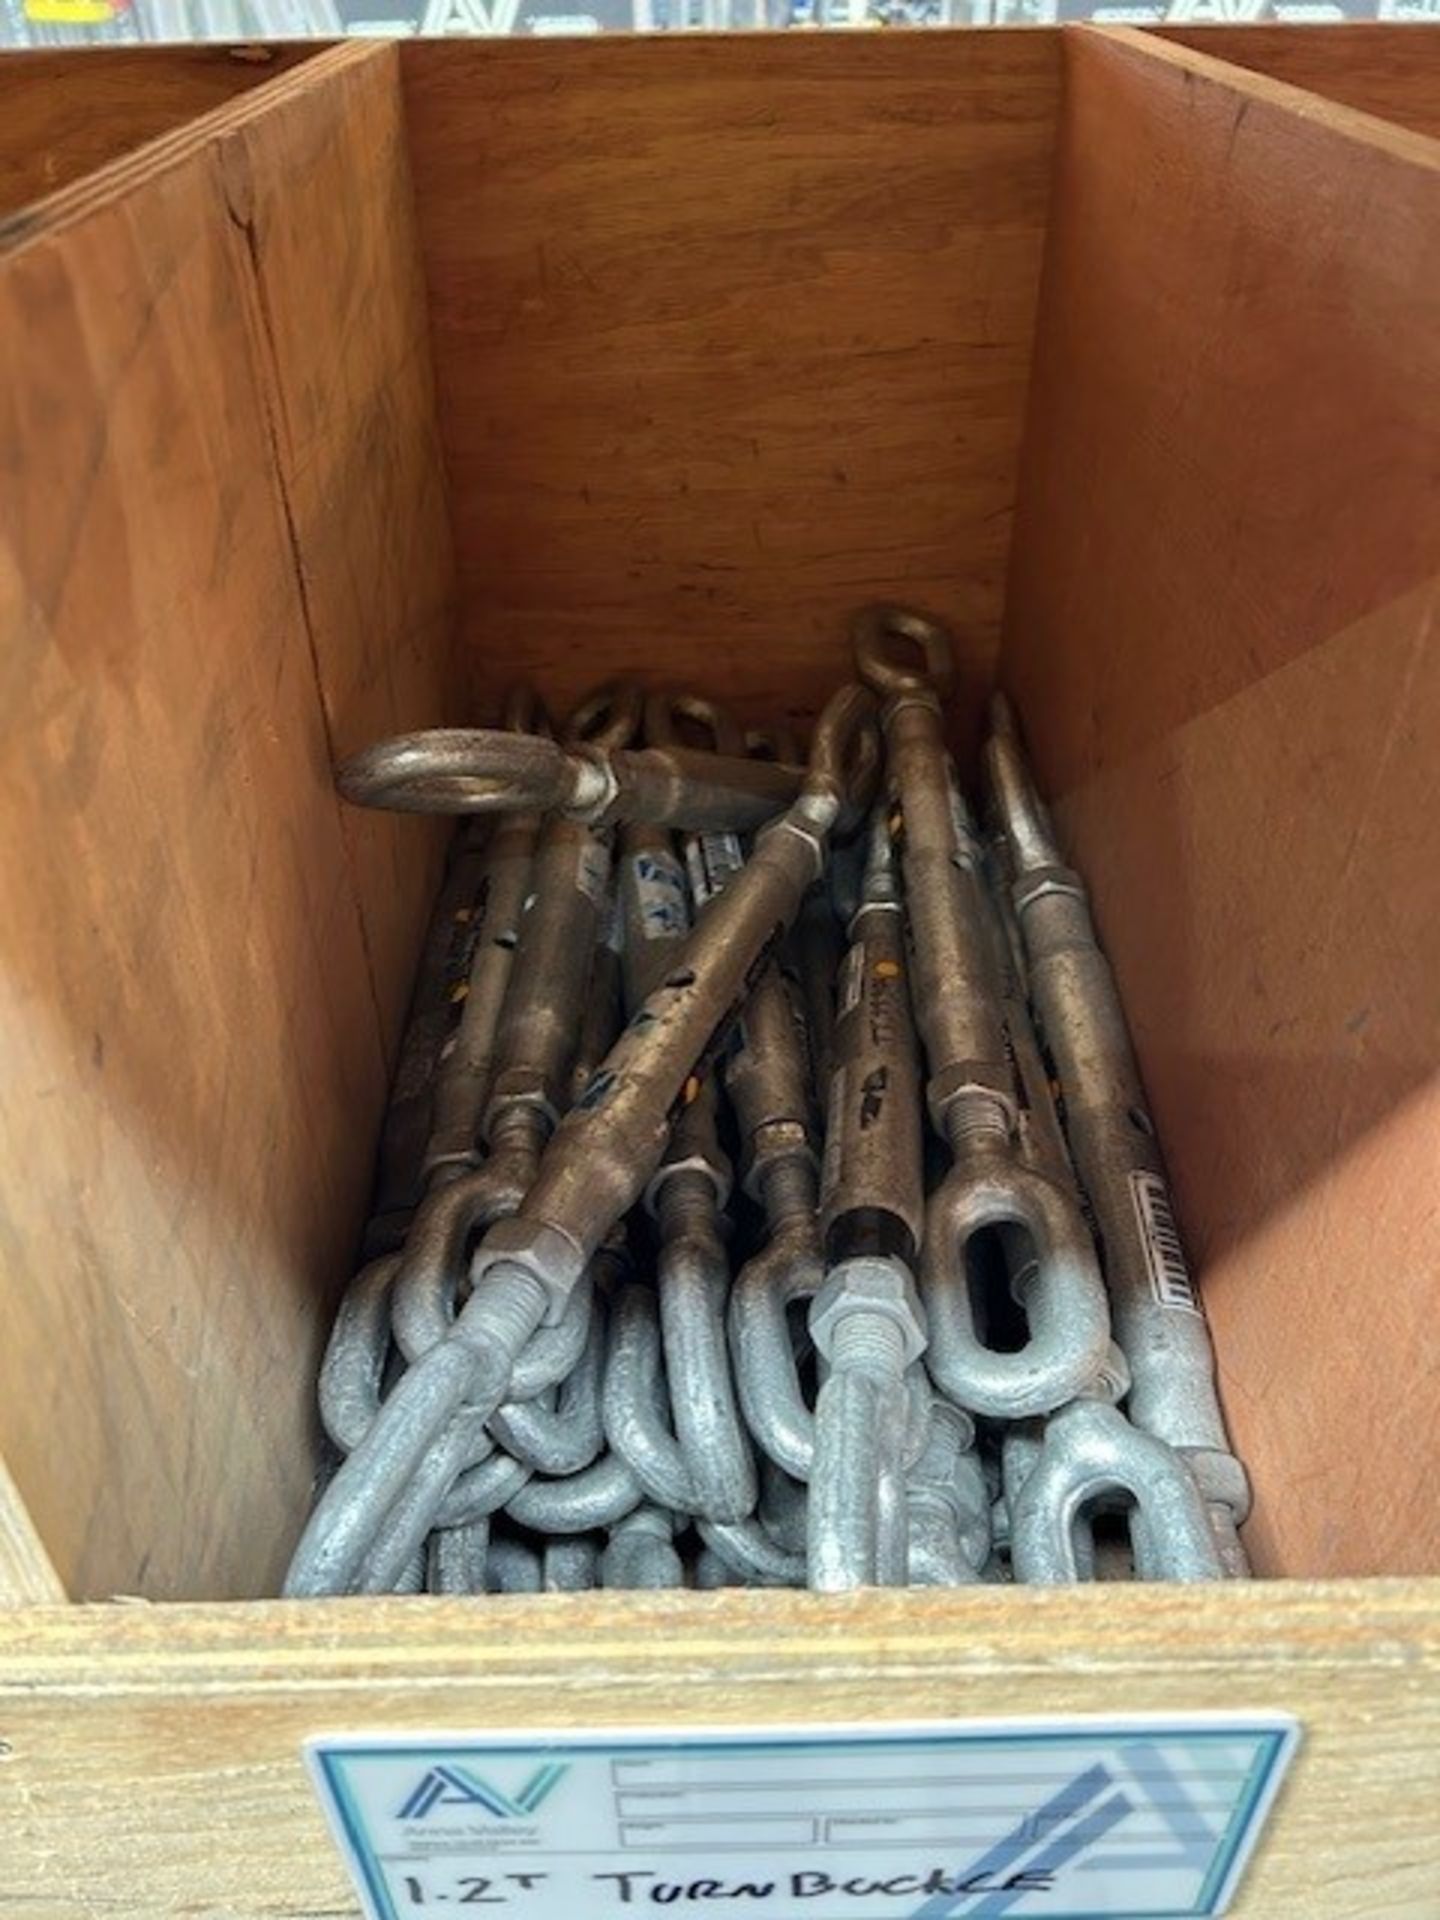 Contents Of Rigging Rack - Image 12 of 17